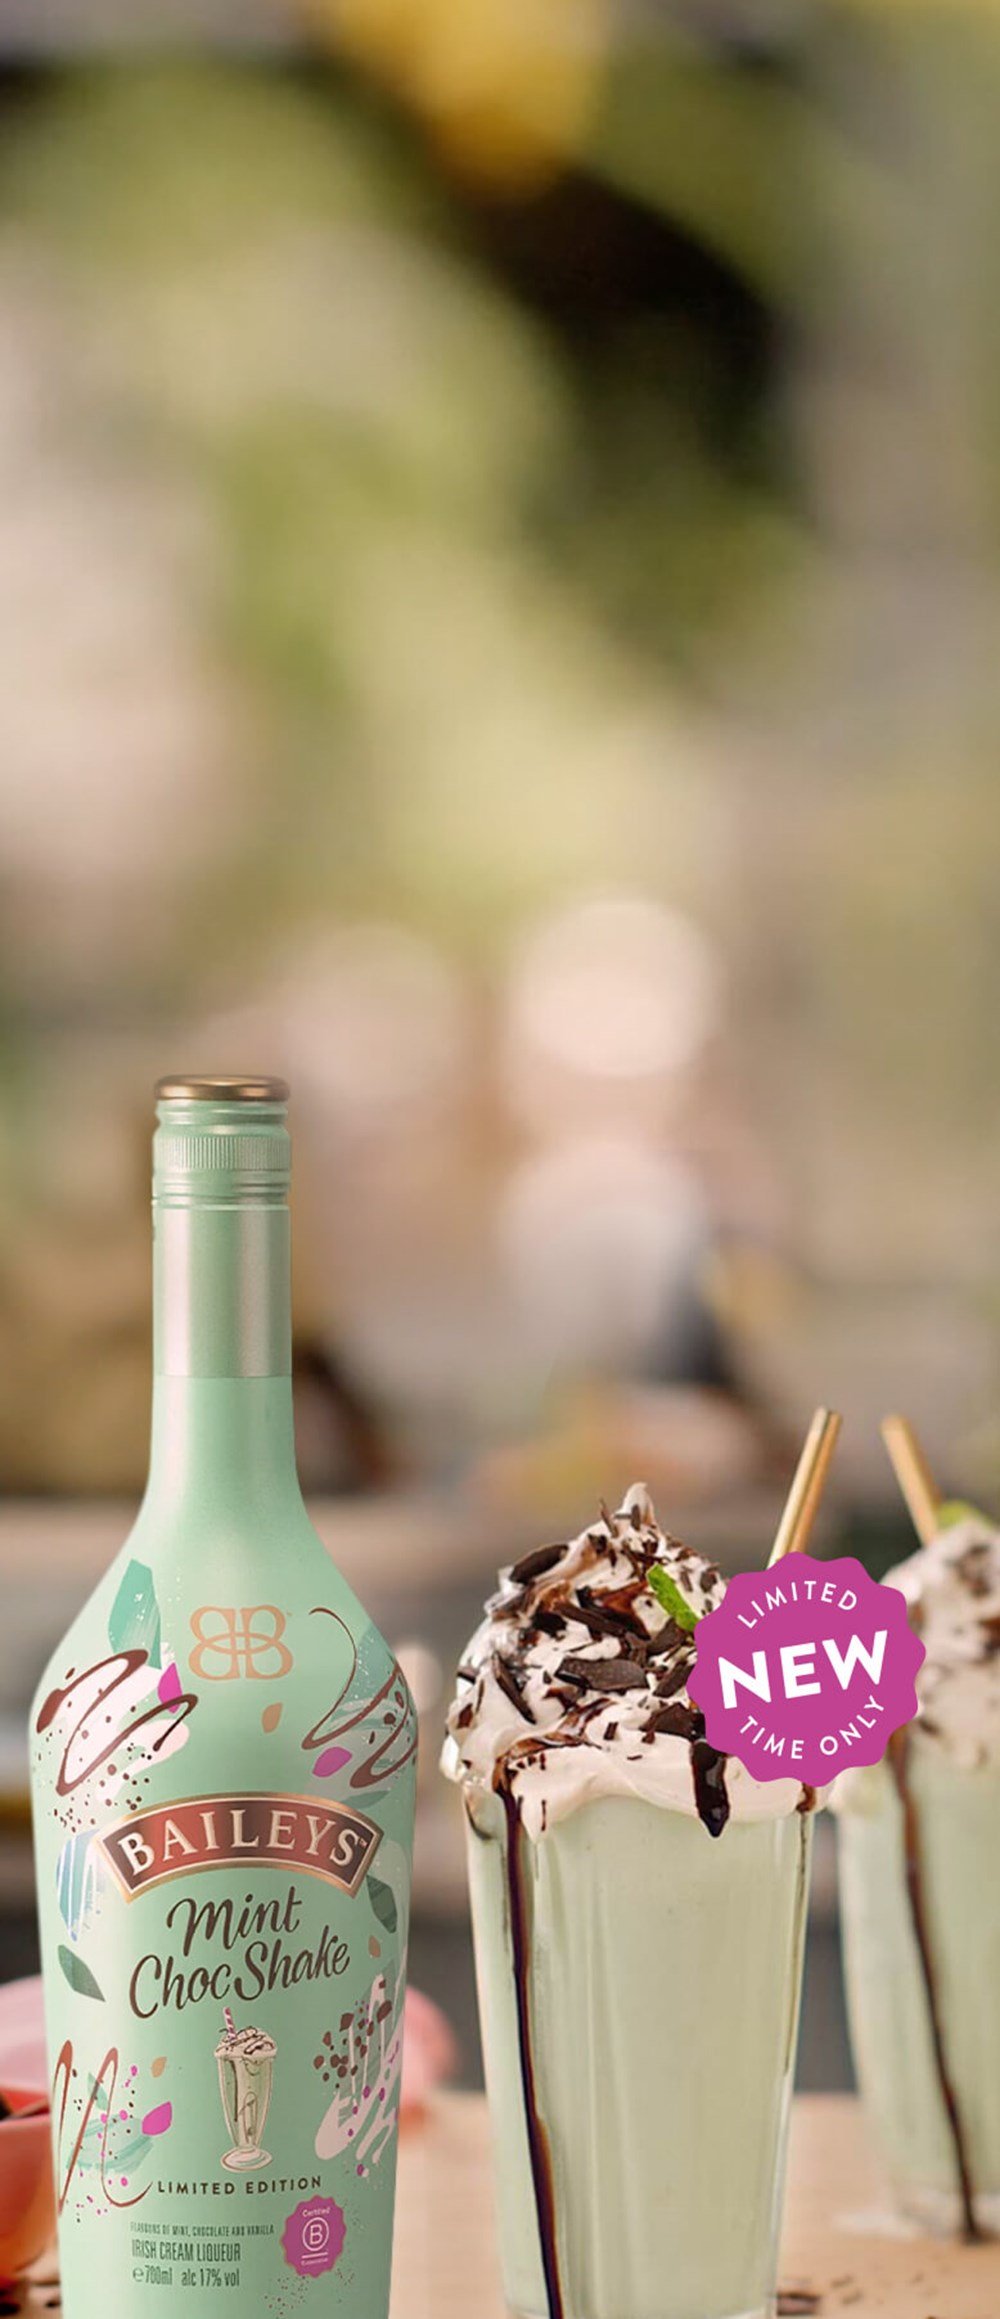 Baileys Mint Chocolate Shake bottle with a few cocktails